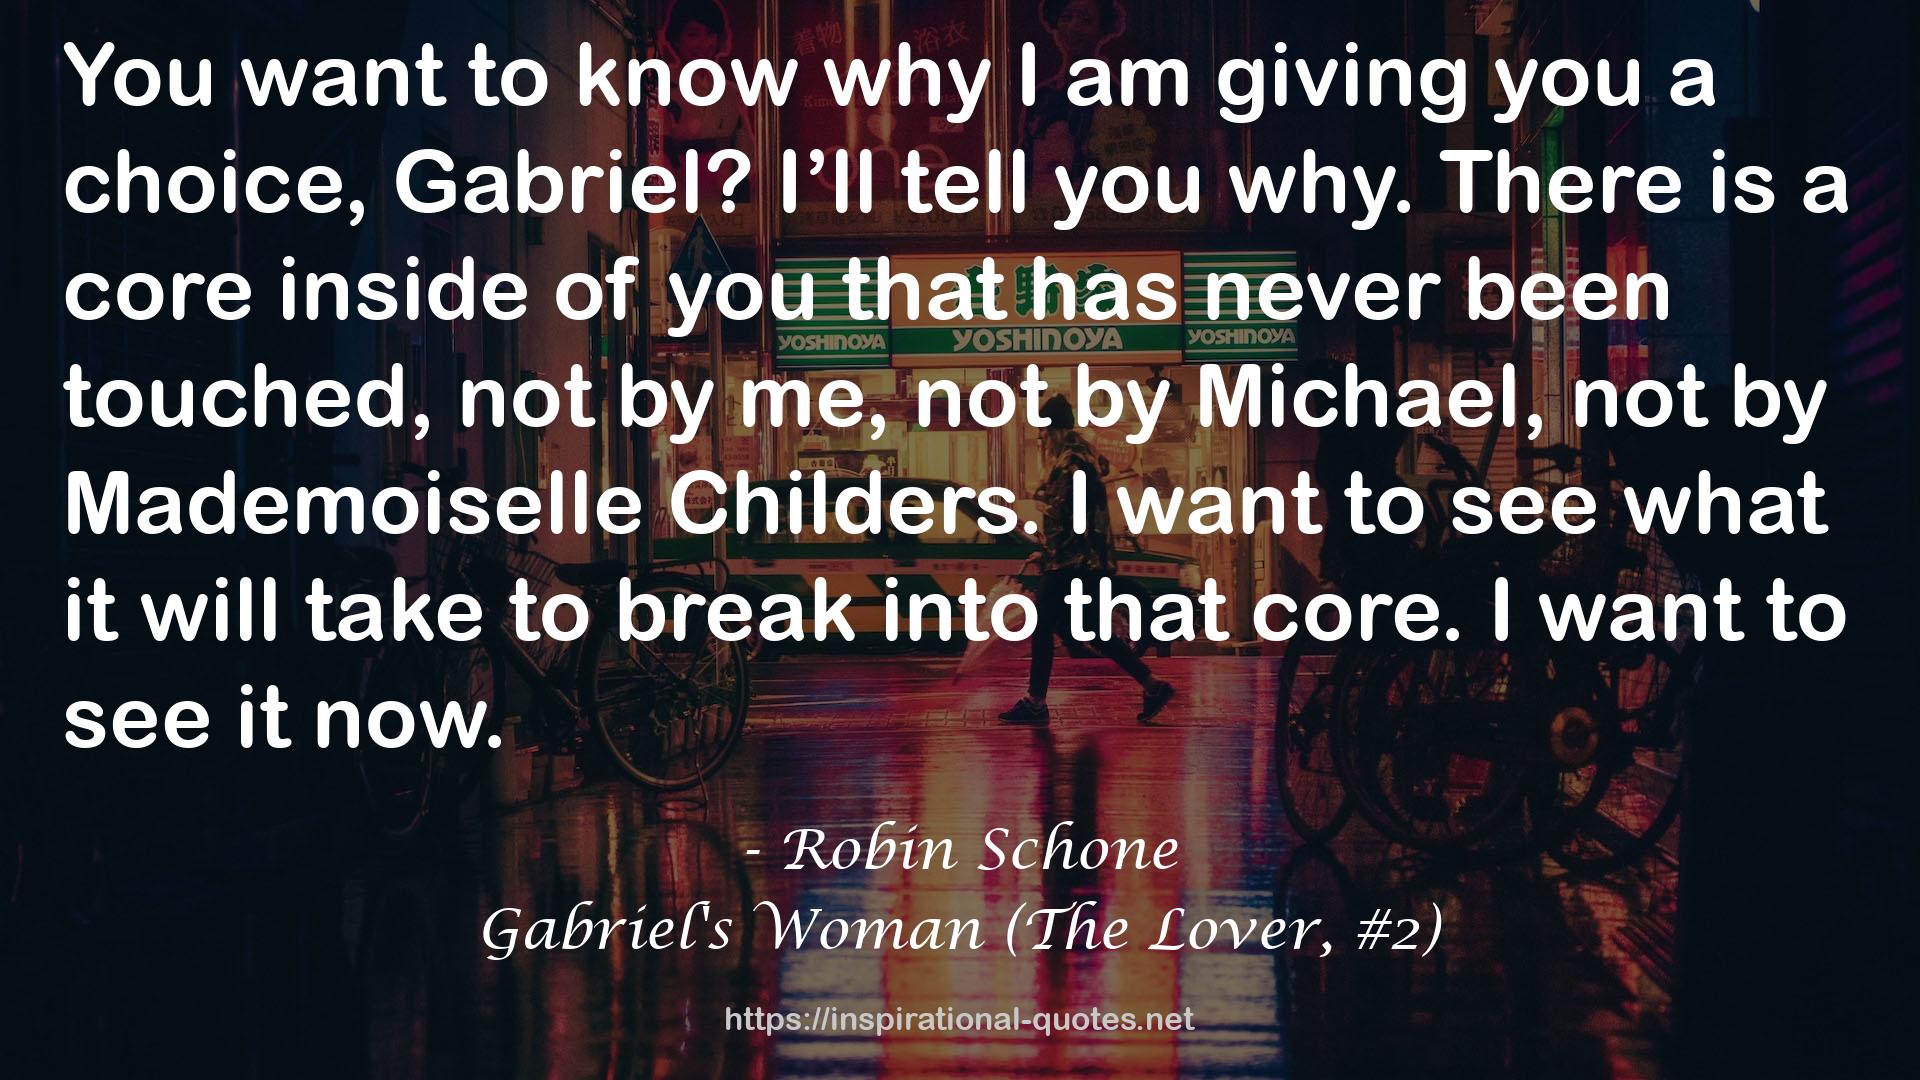 Gabriel's Woman (The Lover, #2) QUOTES